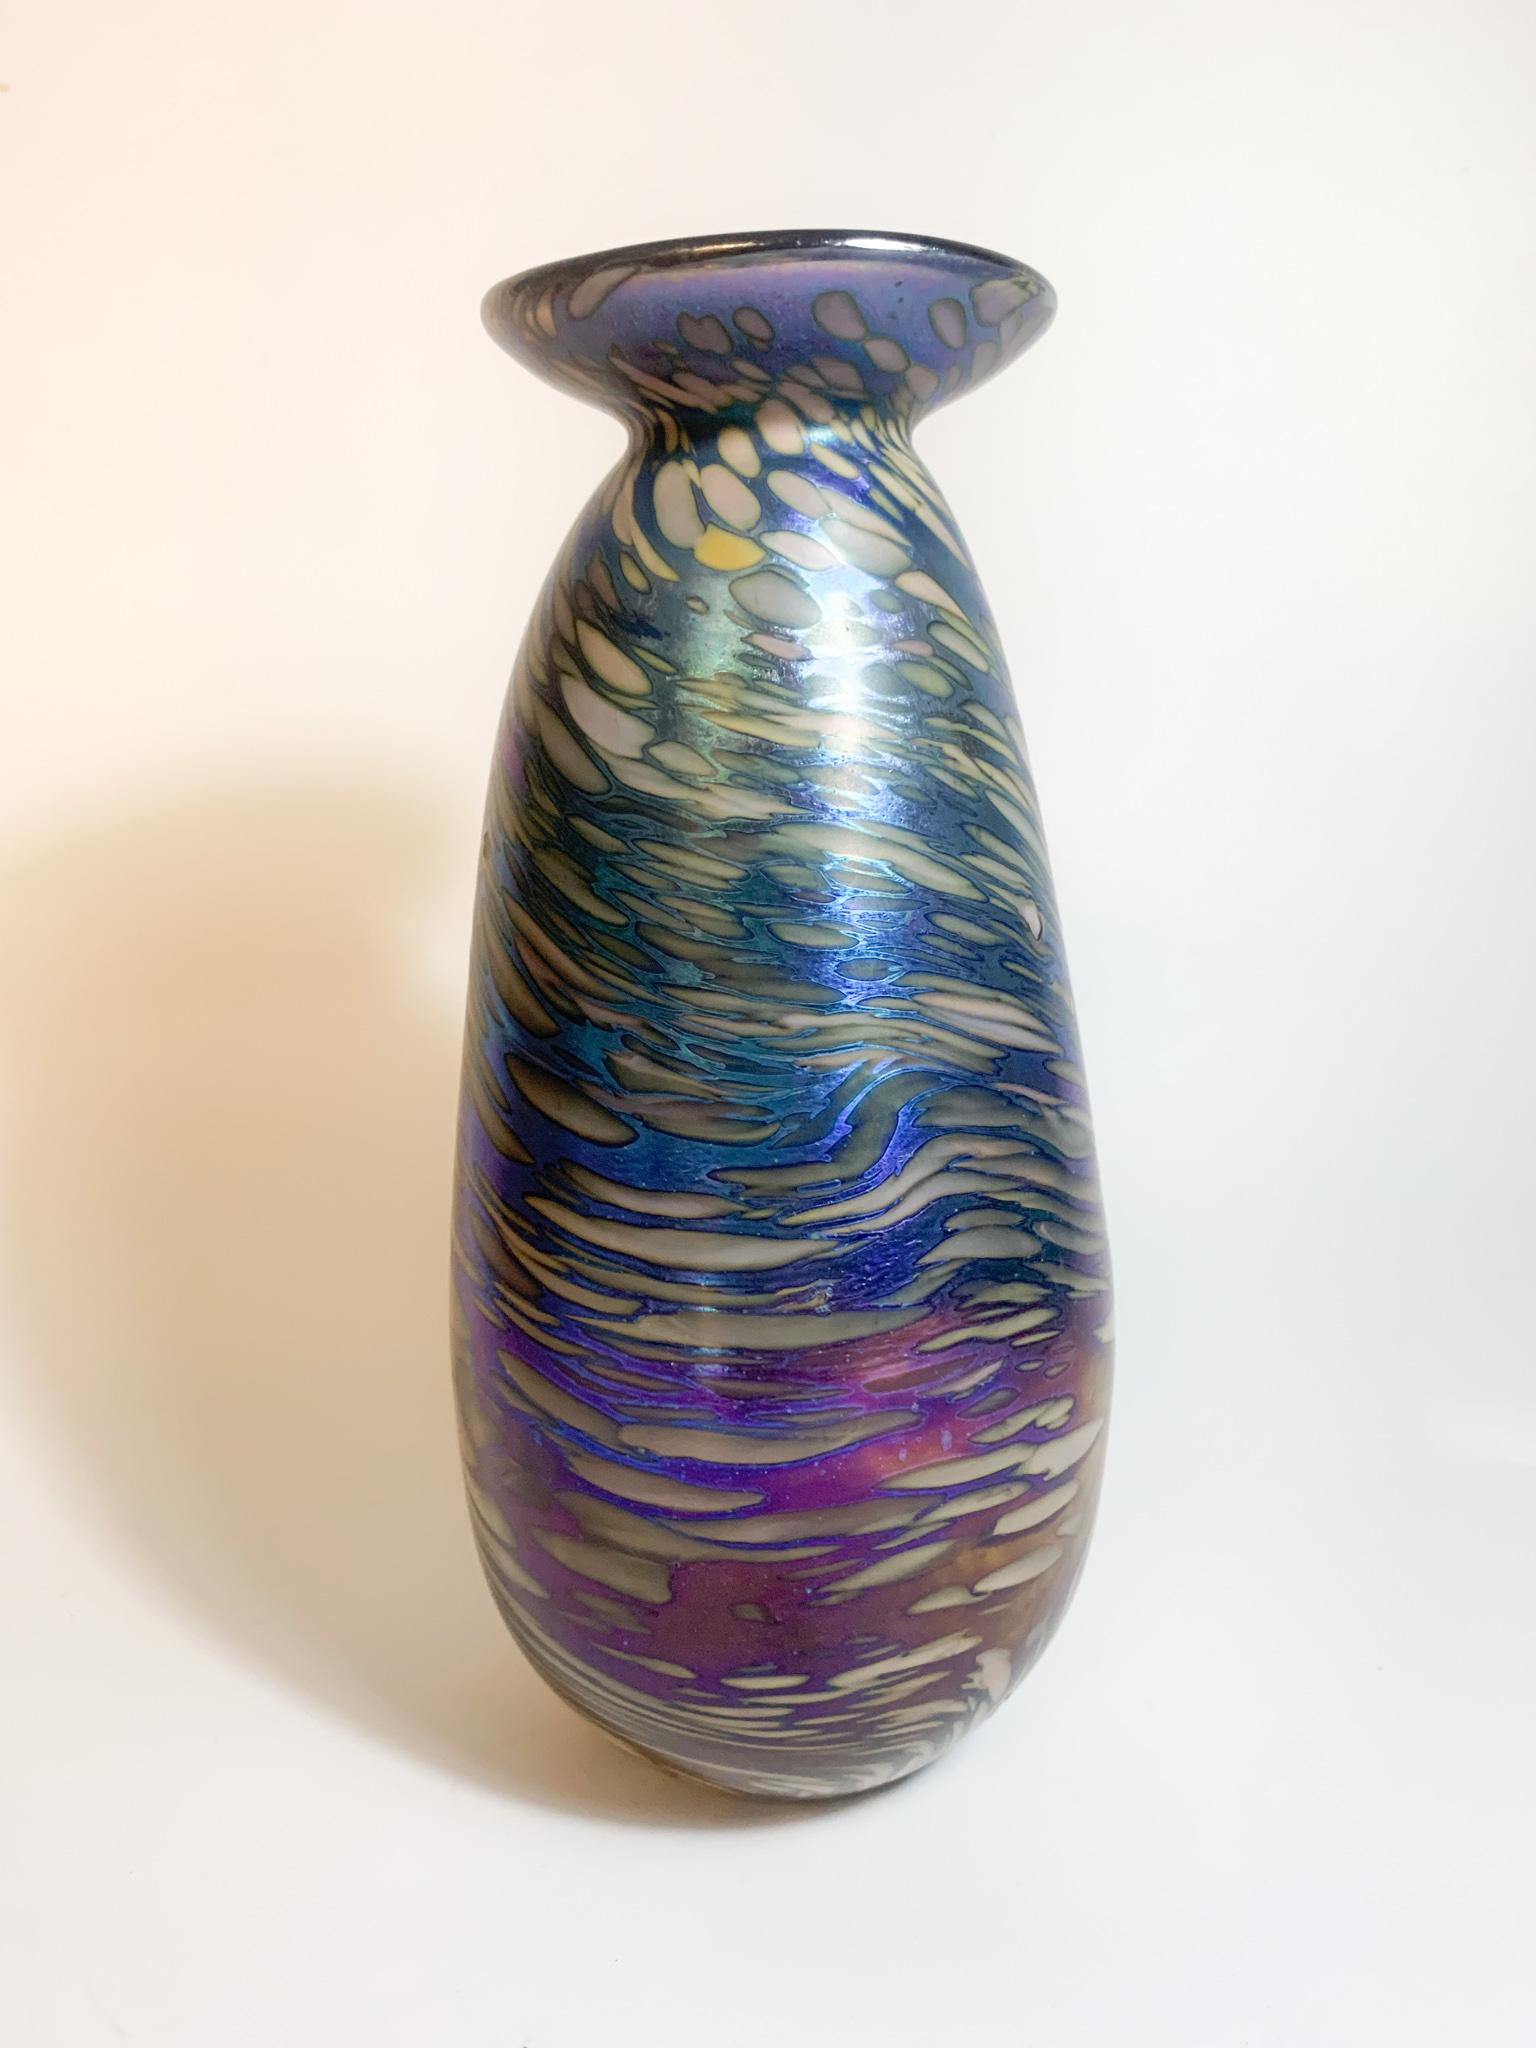 Vase in multicolored iridescent glass by Loetz, made in the 1940s

Ø cm 9 h cm 20

The production of Loetz glass began with Johan Loetz (1778-1848) in the 18th century through the takeover of the Klostermühle glassworks.

In the second half of